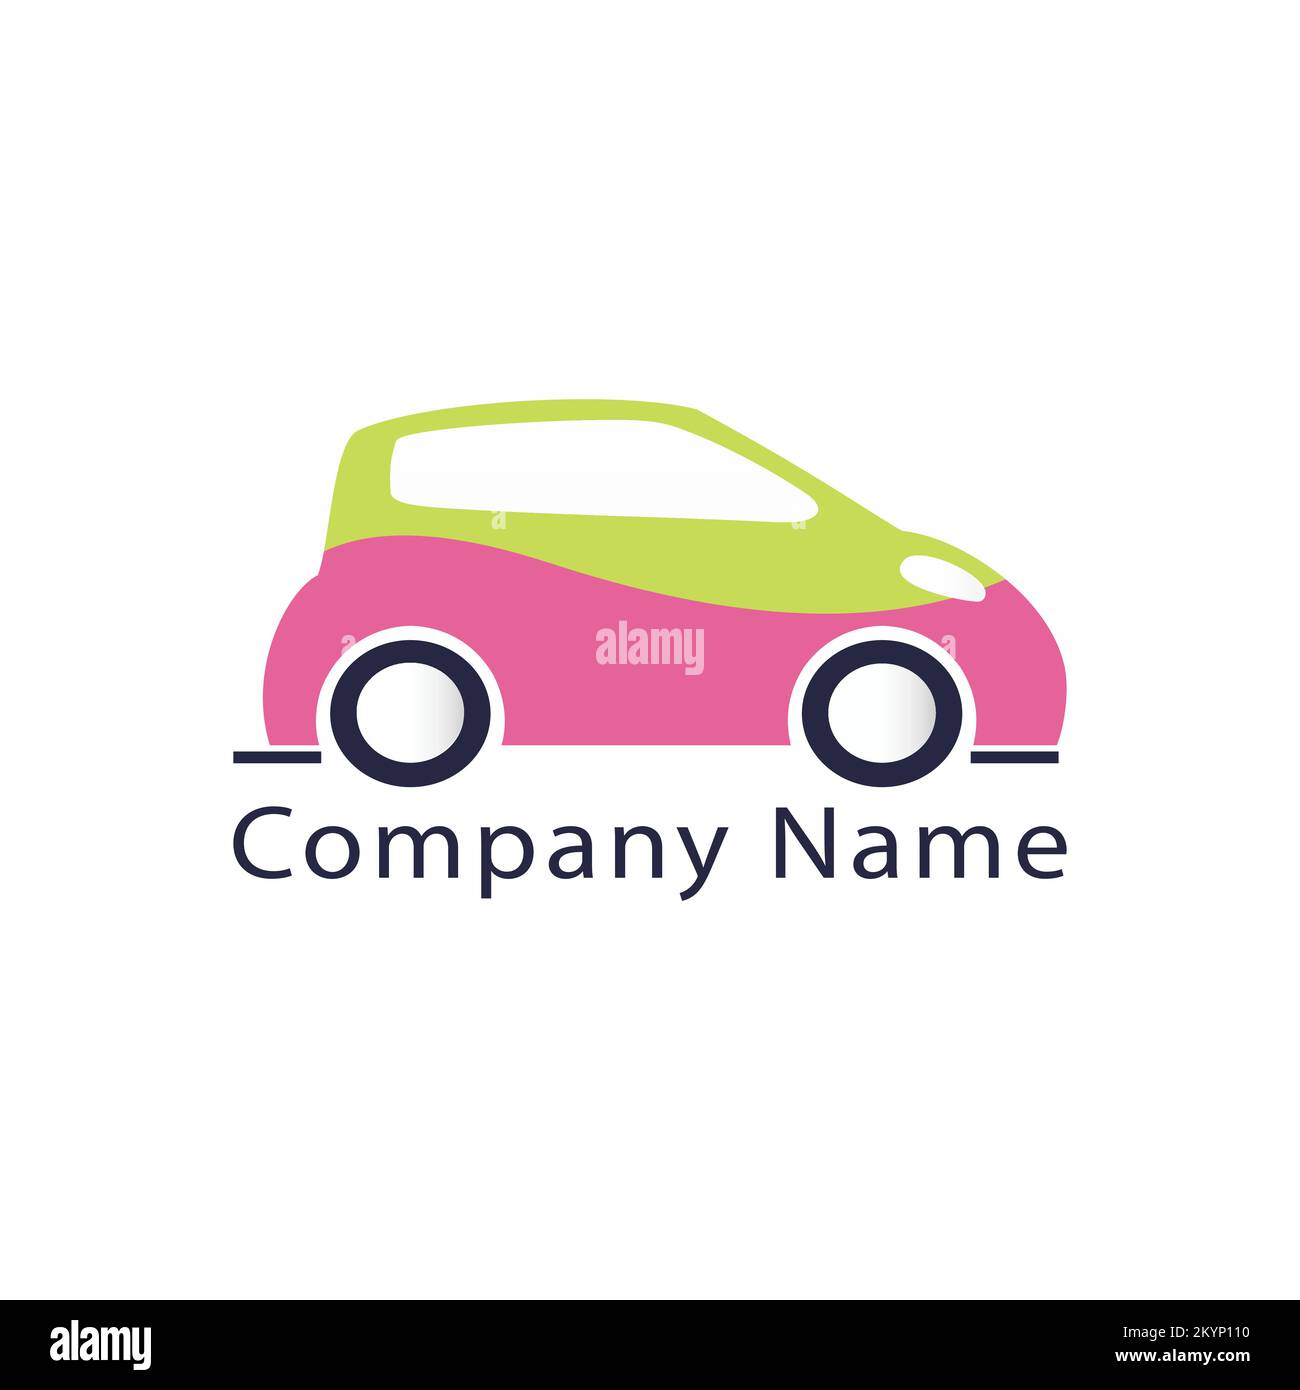 Taxi car logo design with pink and green colors on white background Stock Vector